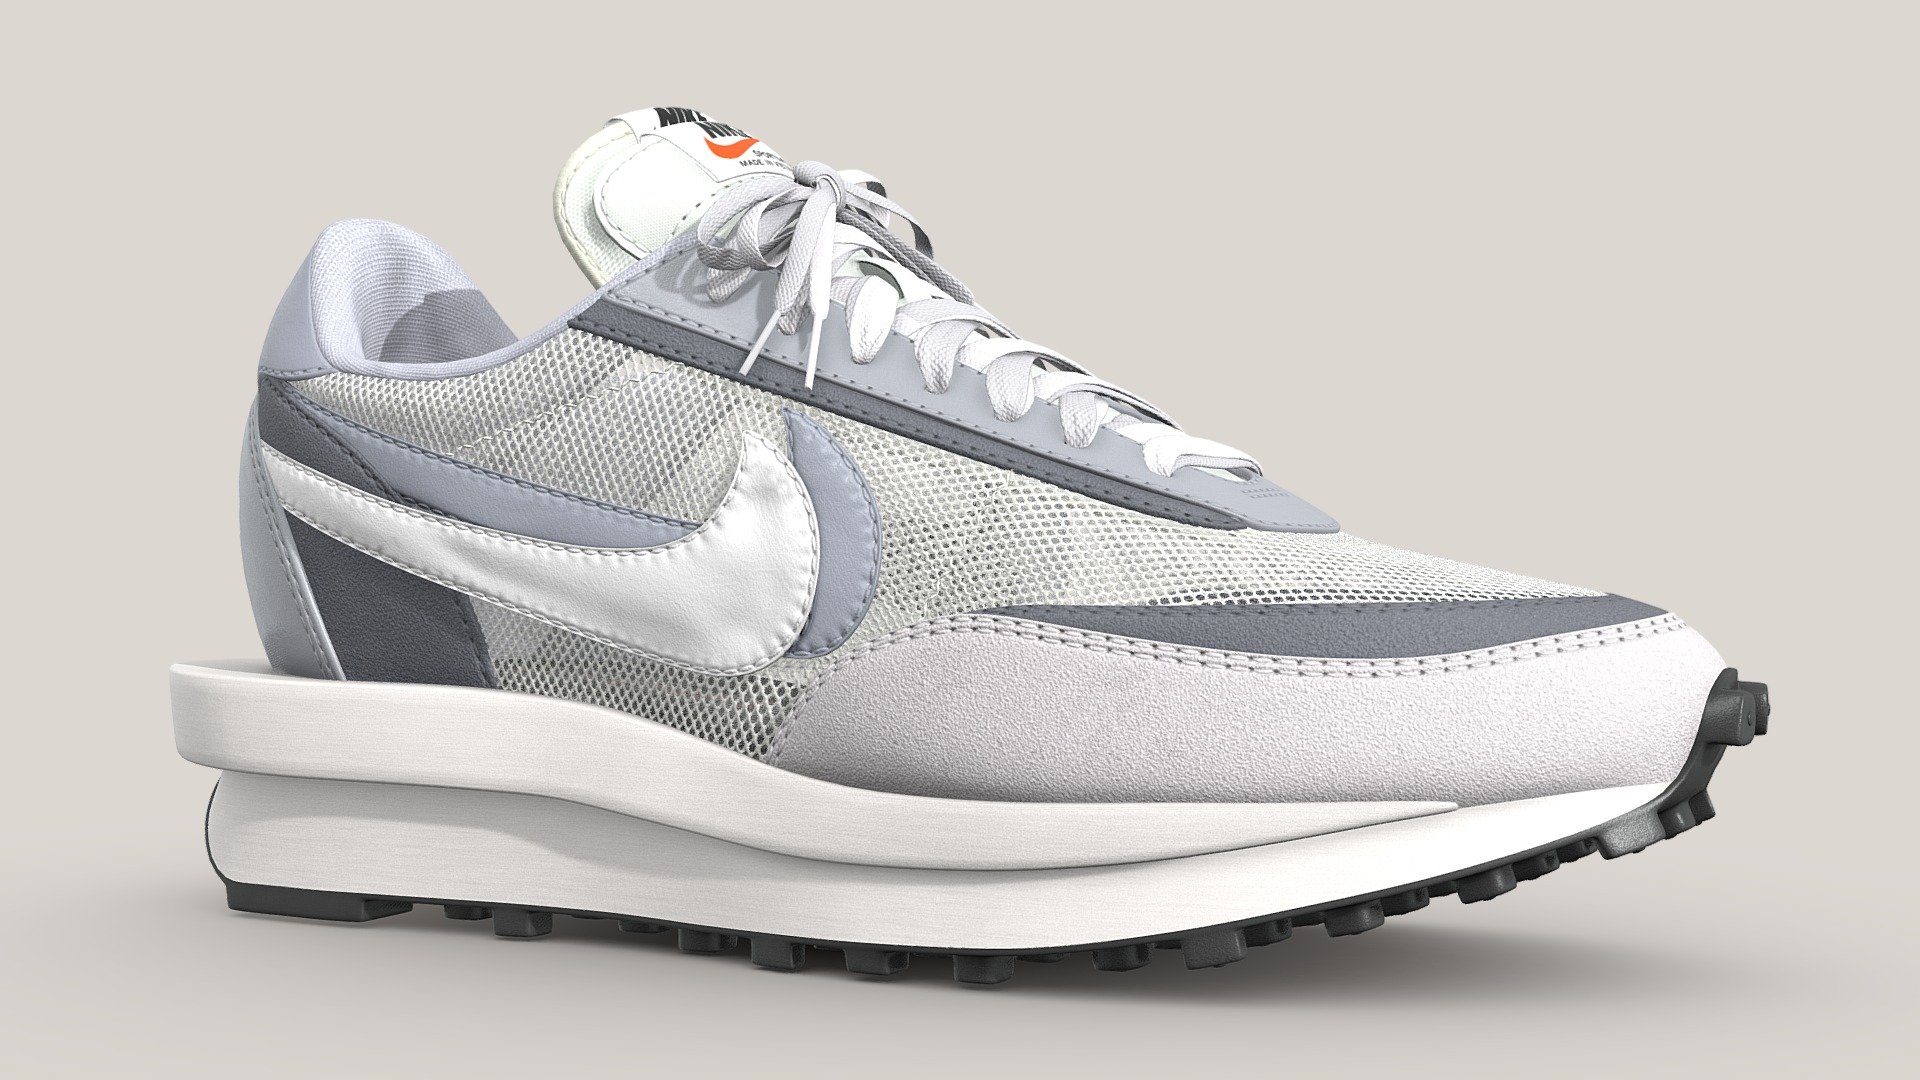 Nike Sacai LD Waffle in Summit Grey. This is one of the original colourways that released in 2019.

This model is a 1:1 replication of the original. All dimensions, angles, and curves are the same as the real life counterpart. The shoe is subdivision ready with a base polycount of 23,399 polys per shoe. The mesh uses four texture sets, all at 4096x4096 resolution, with the following maps in use: Base Color, Metallic, Roughness, Normal. The base color map contains the transparency information, so plug the alpha of the texture into the alpha channel, or alternatively put the base color texture where the opacity should go

Included is a One Mesh version which uses just 1 texture map per shoe,

The main Blender files contain the full texture setup. The mesh is subdivision ready so you can increase/reduce the subdivision count to achieve your desired look 3d model